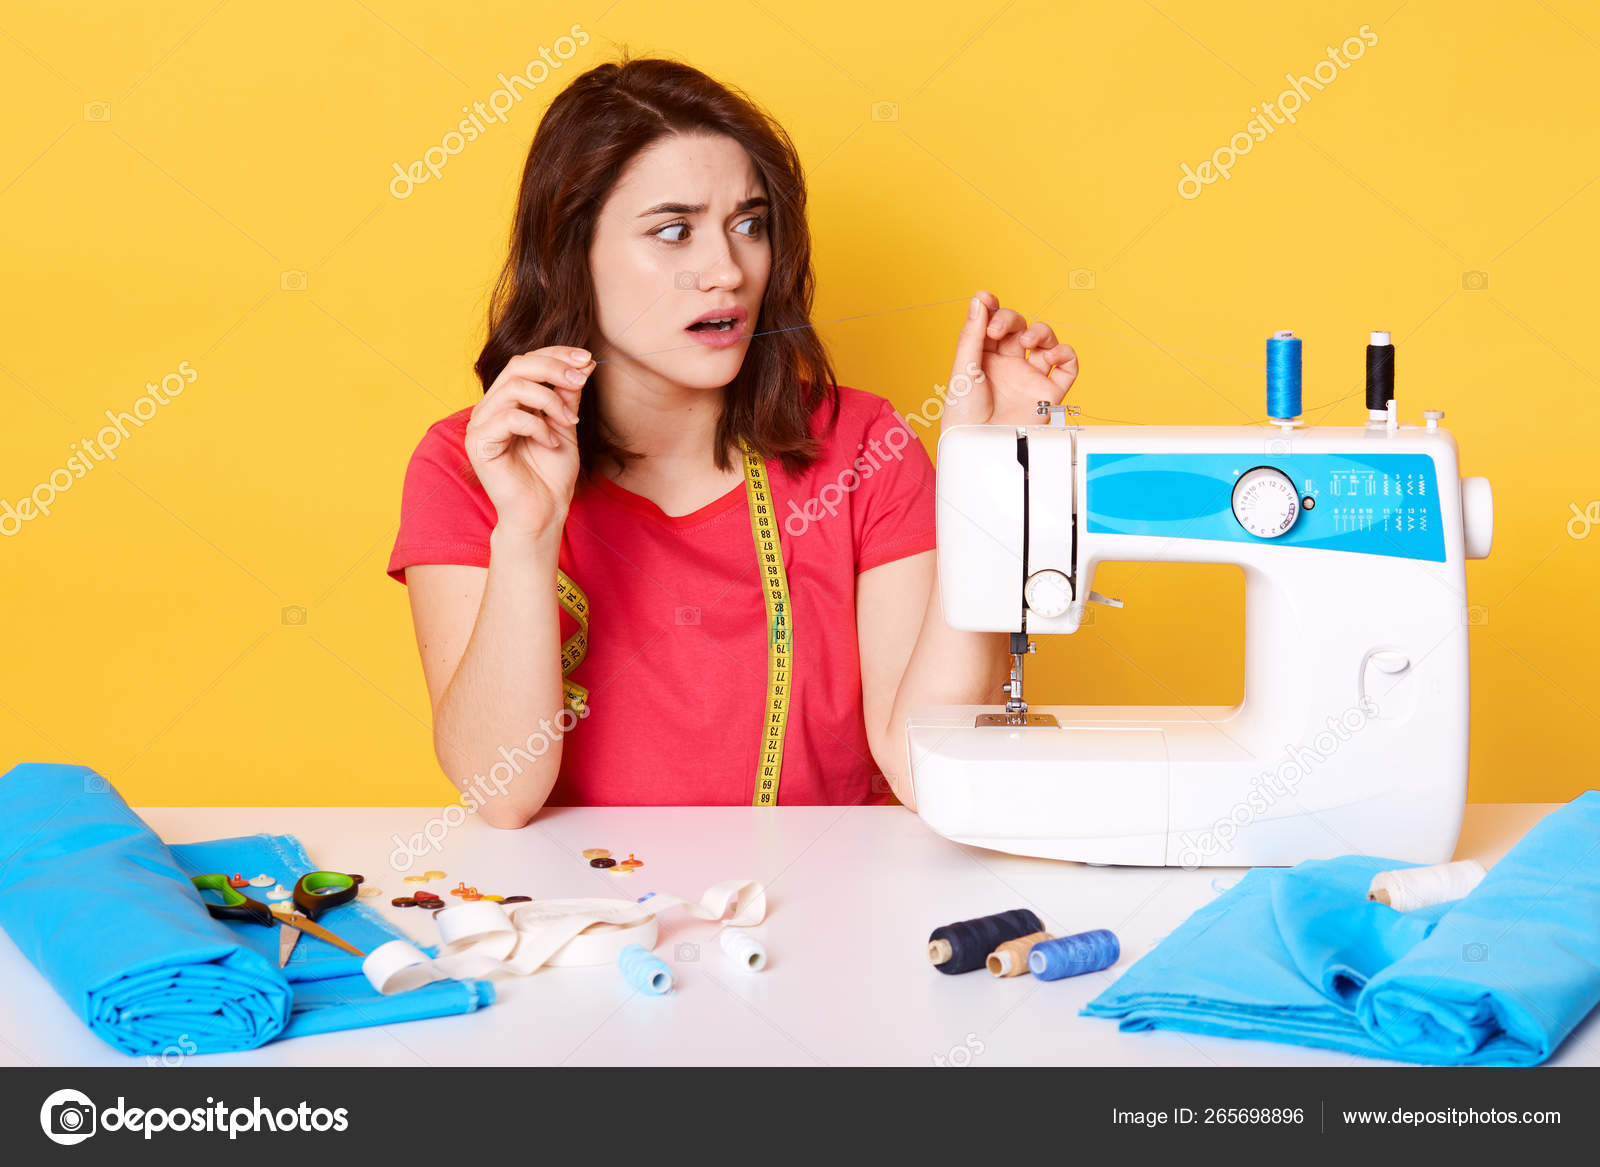 pattern, scissors, tape measure, and a sewing machine. Workplace